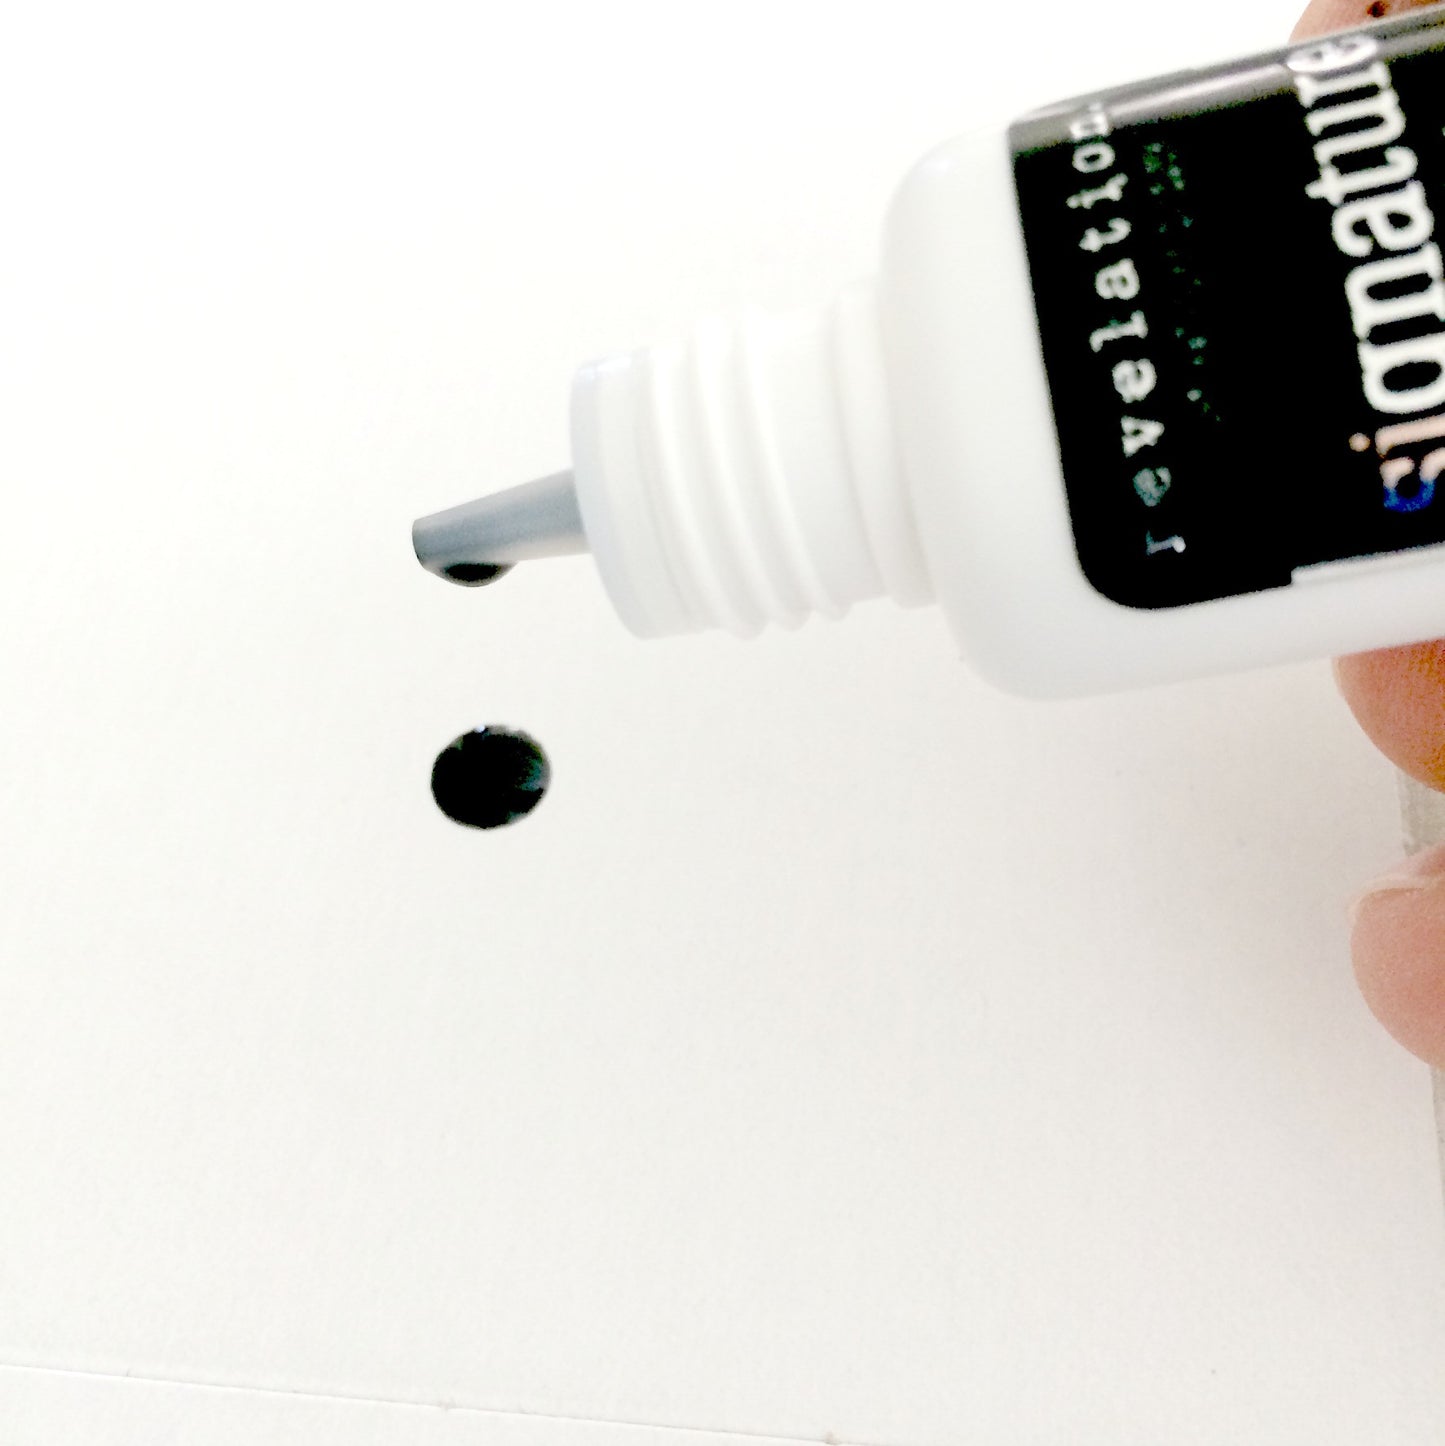 Image of Signature Latex Free Eyelash Extension glue being poured out of bottle. Image shows a drop on white background.